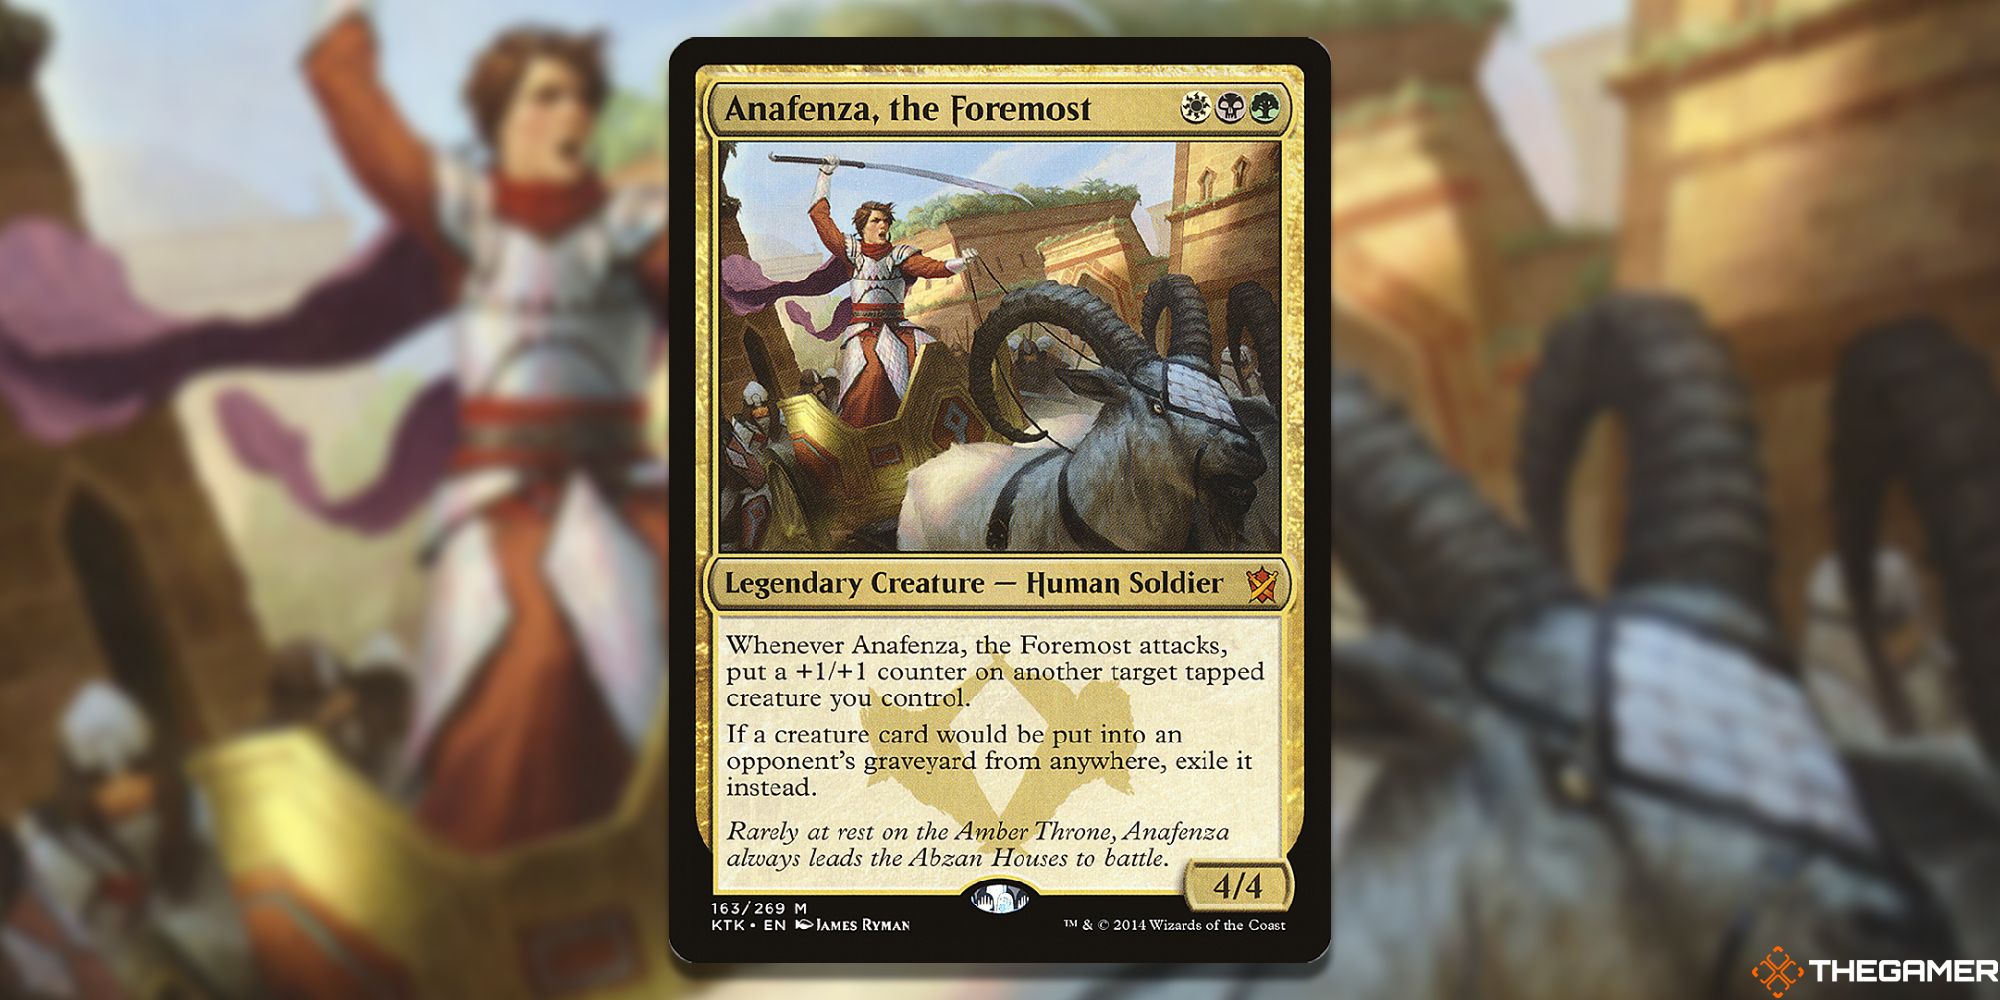 Image of the Anafenza, the Foremost card in Magic: The Gathering, with art by James Ryman